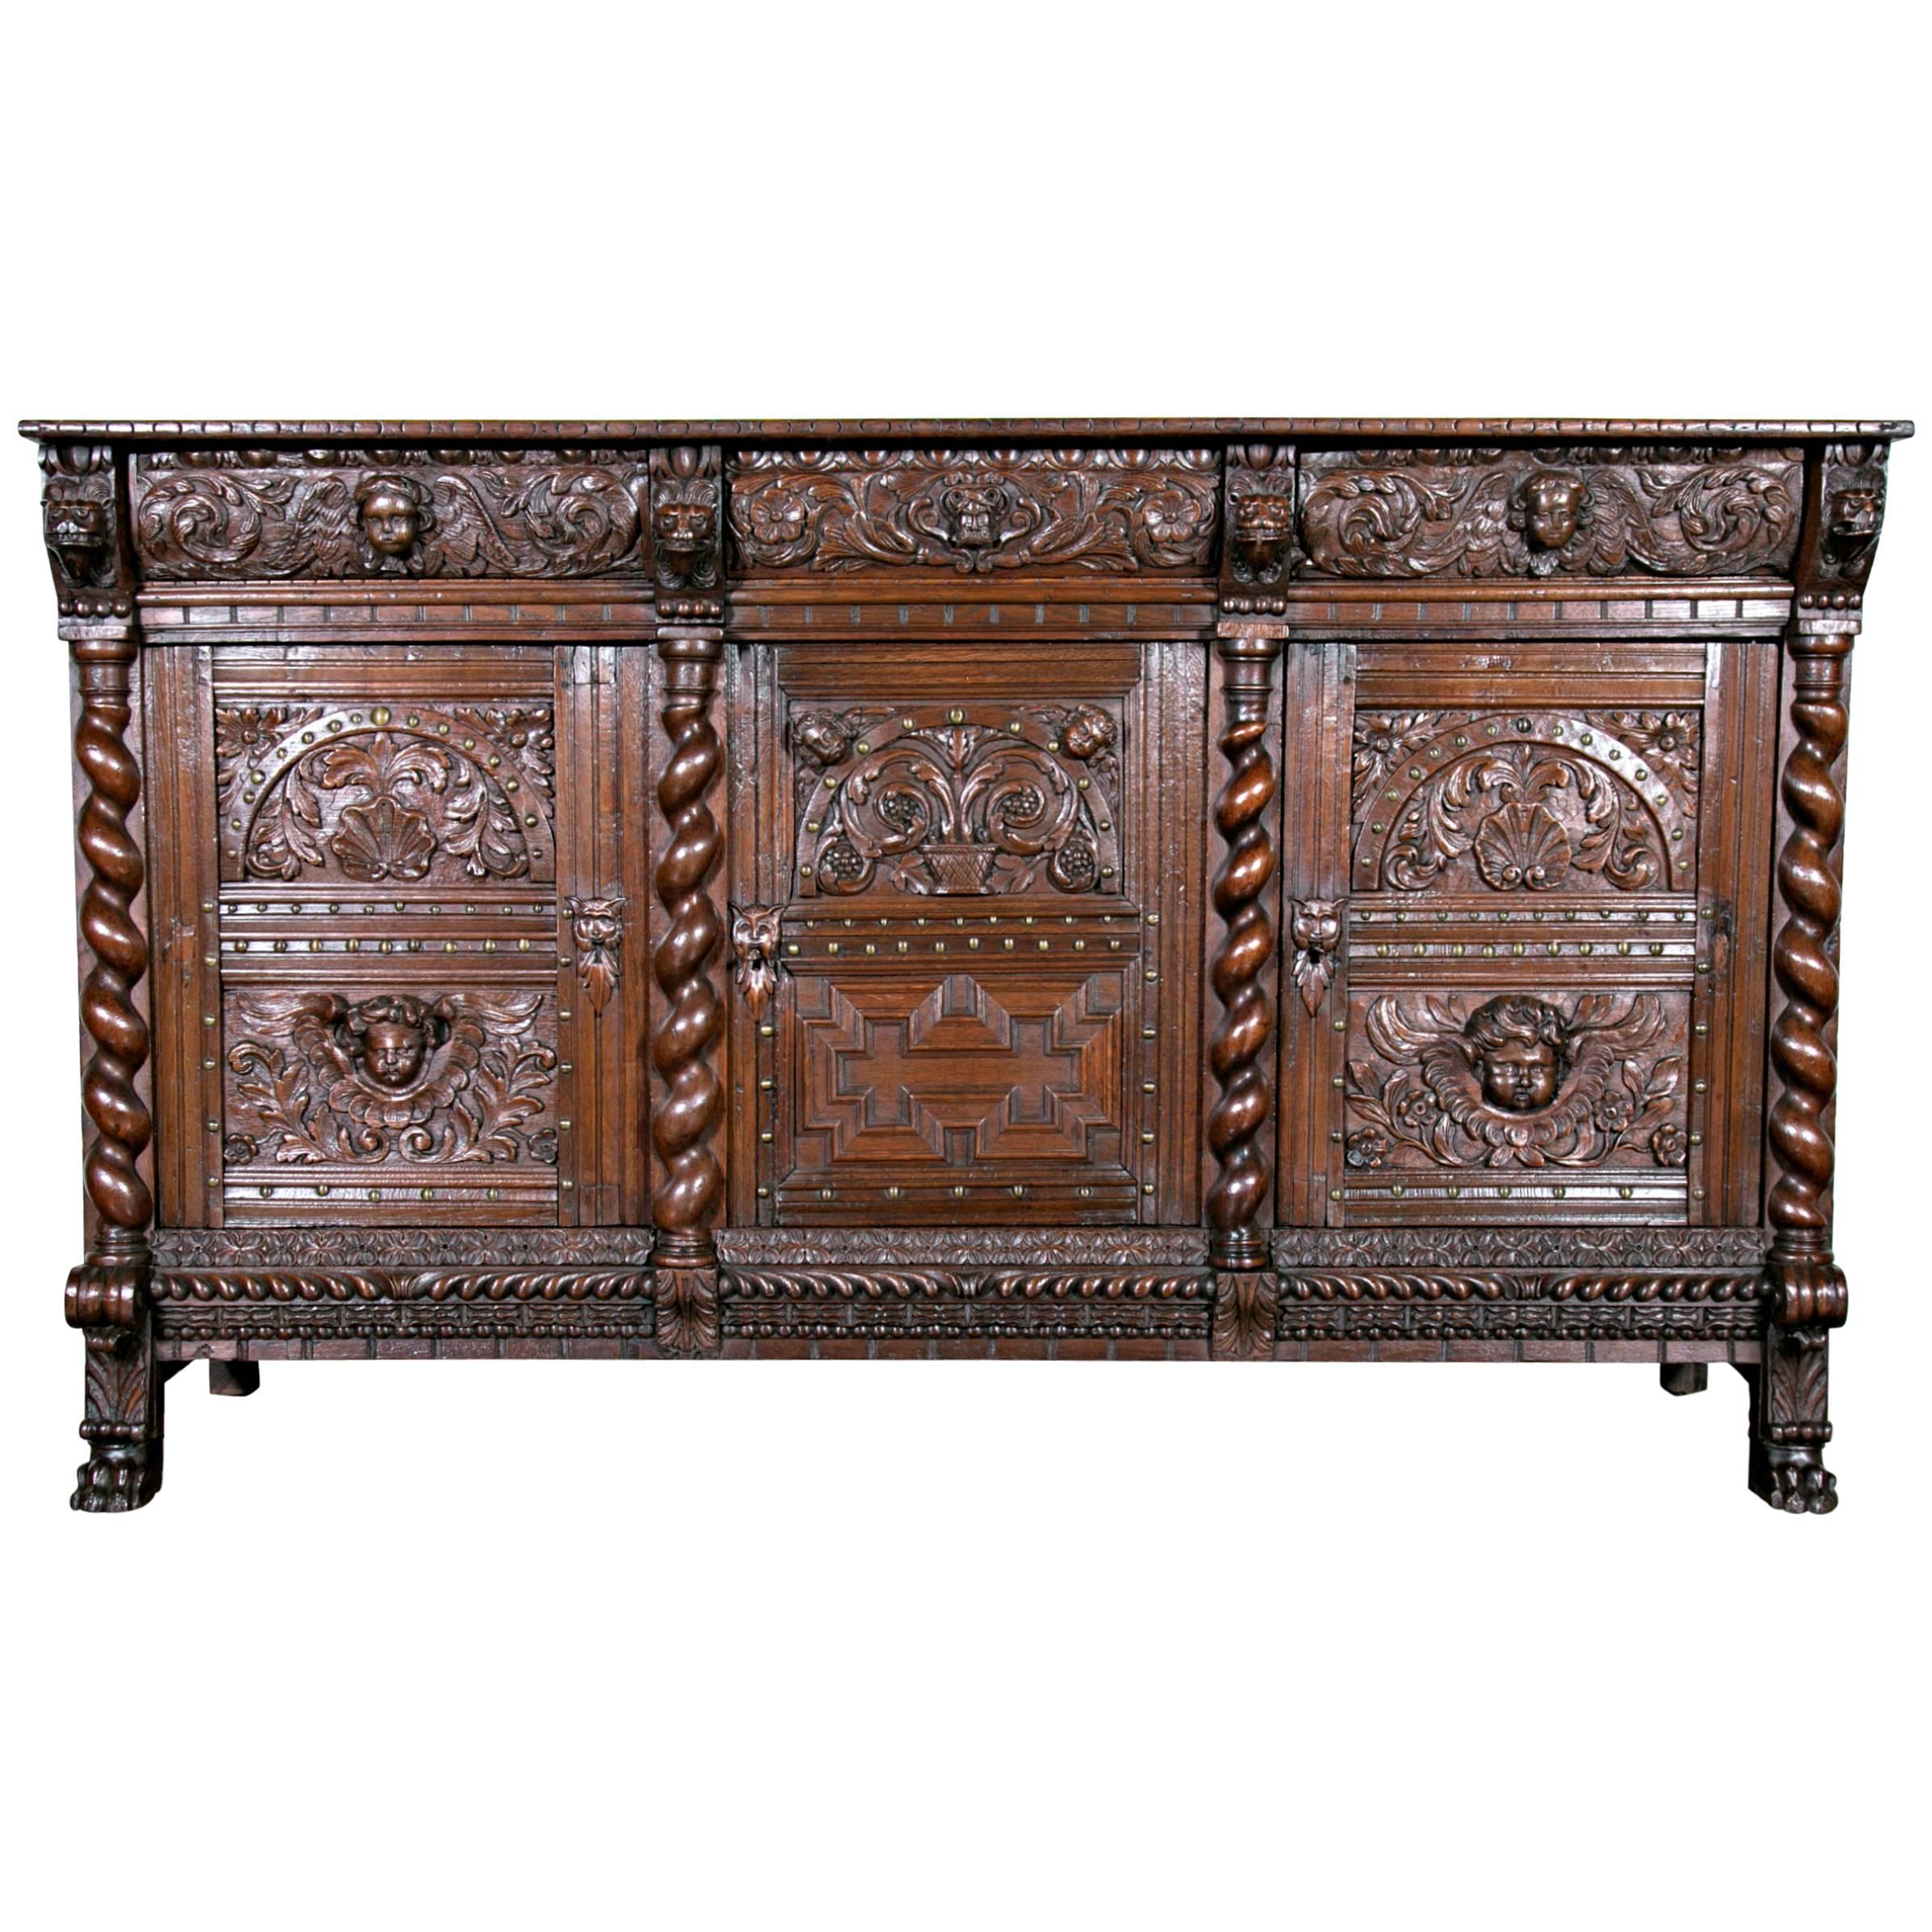 17th Century French Period Louis XIII/Louis XIV Transitional Enfilade Buffet